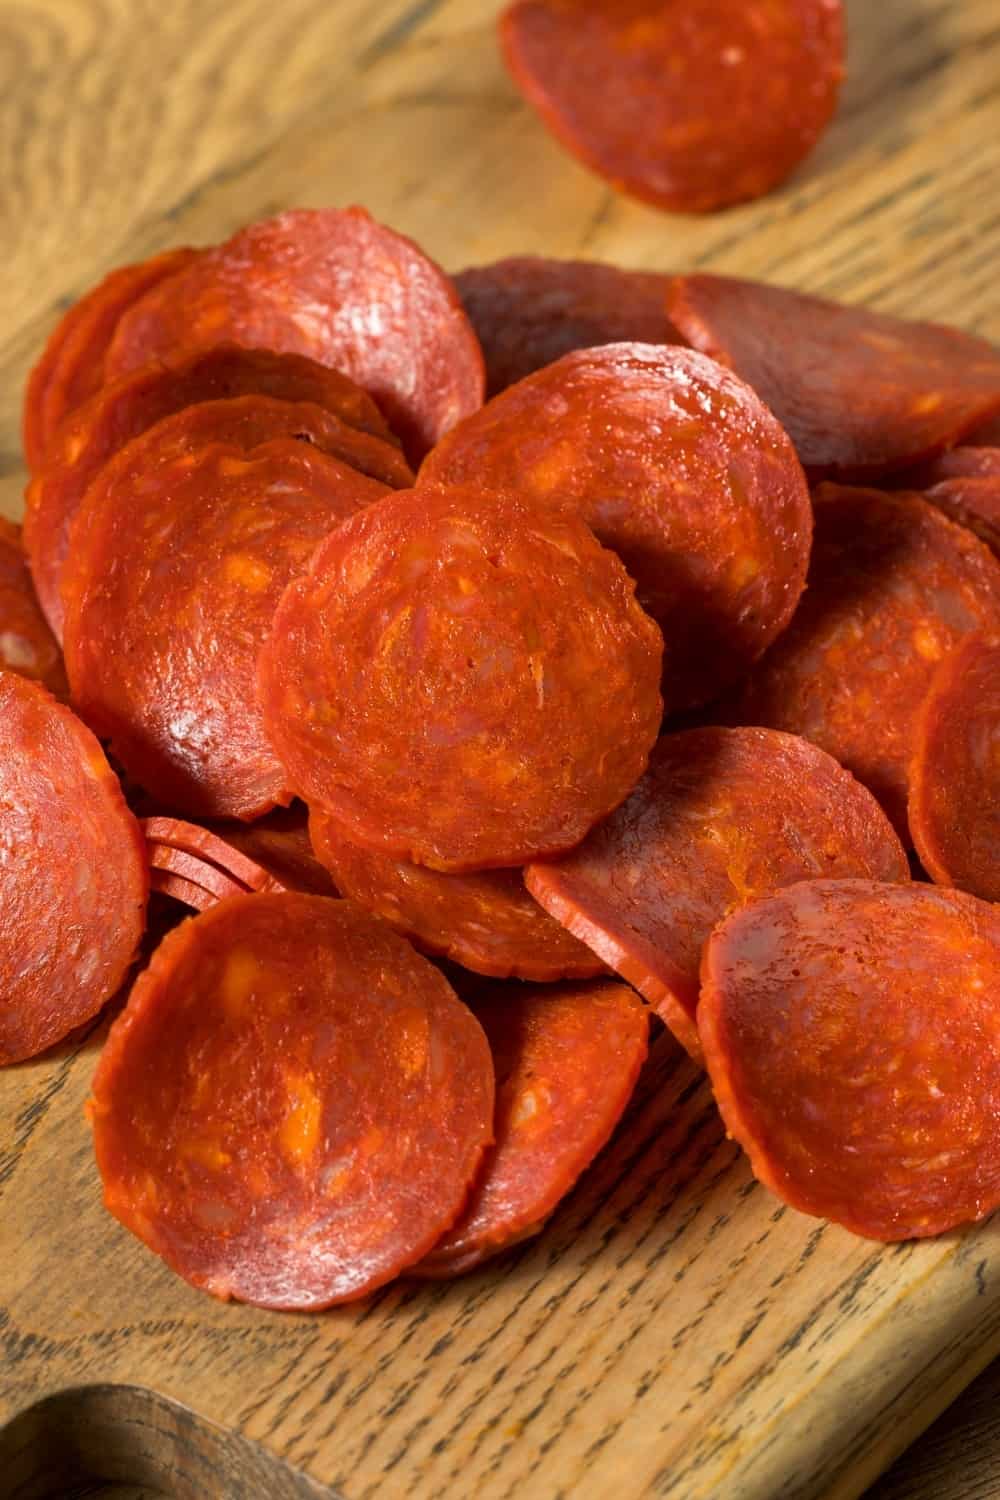 Organic Uncured Italian Pepperoni Slices Ready to Use